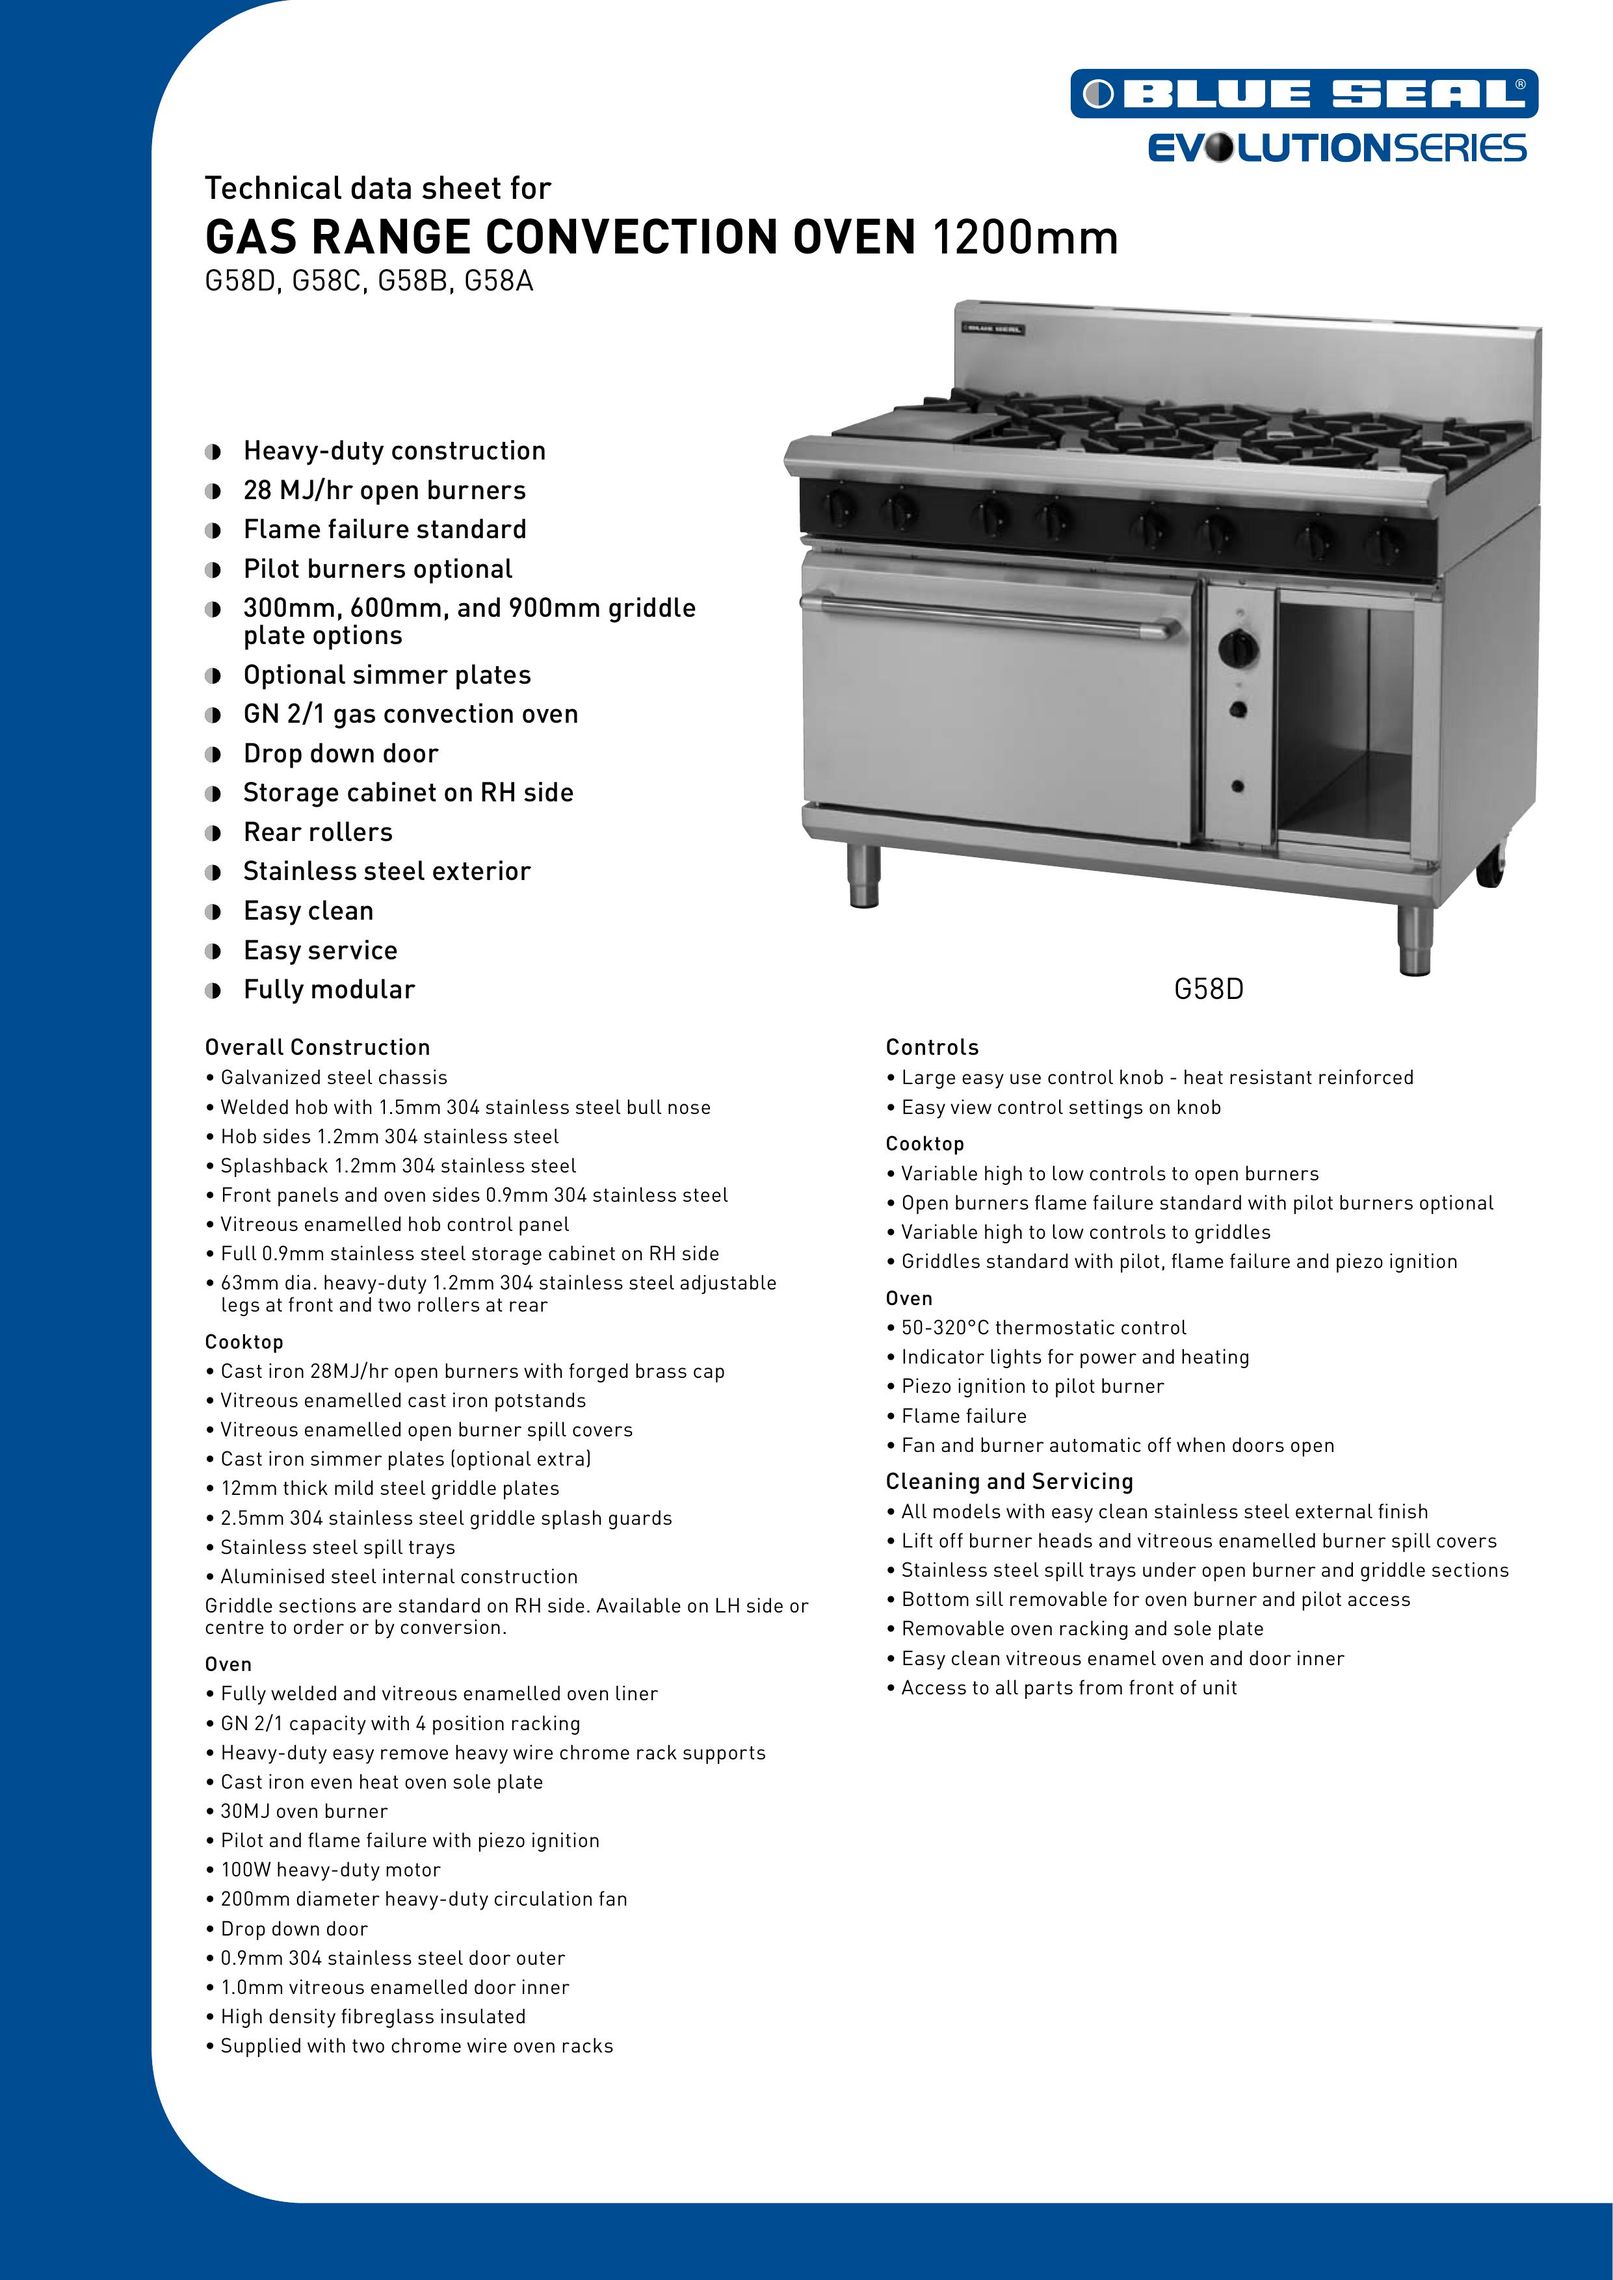 Moffat G58A Convection Oven User Manual